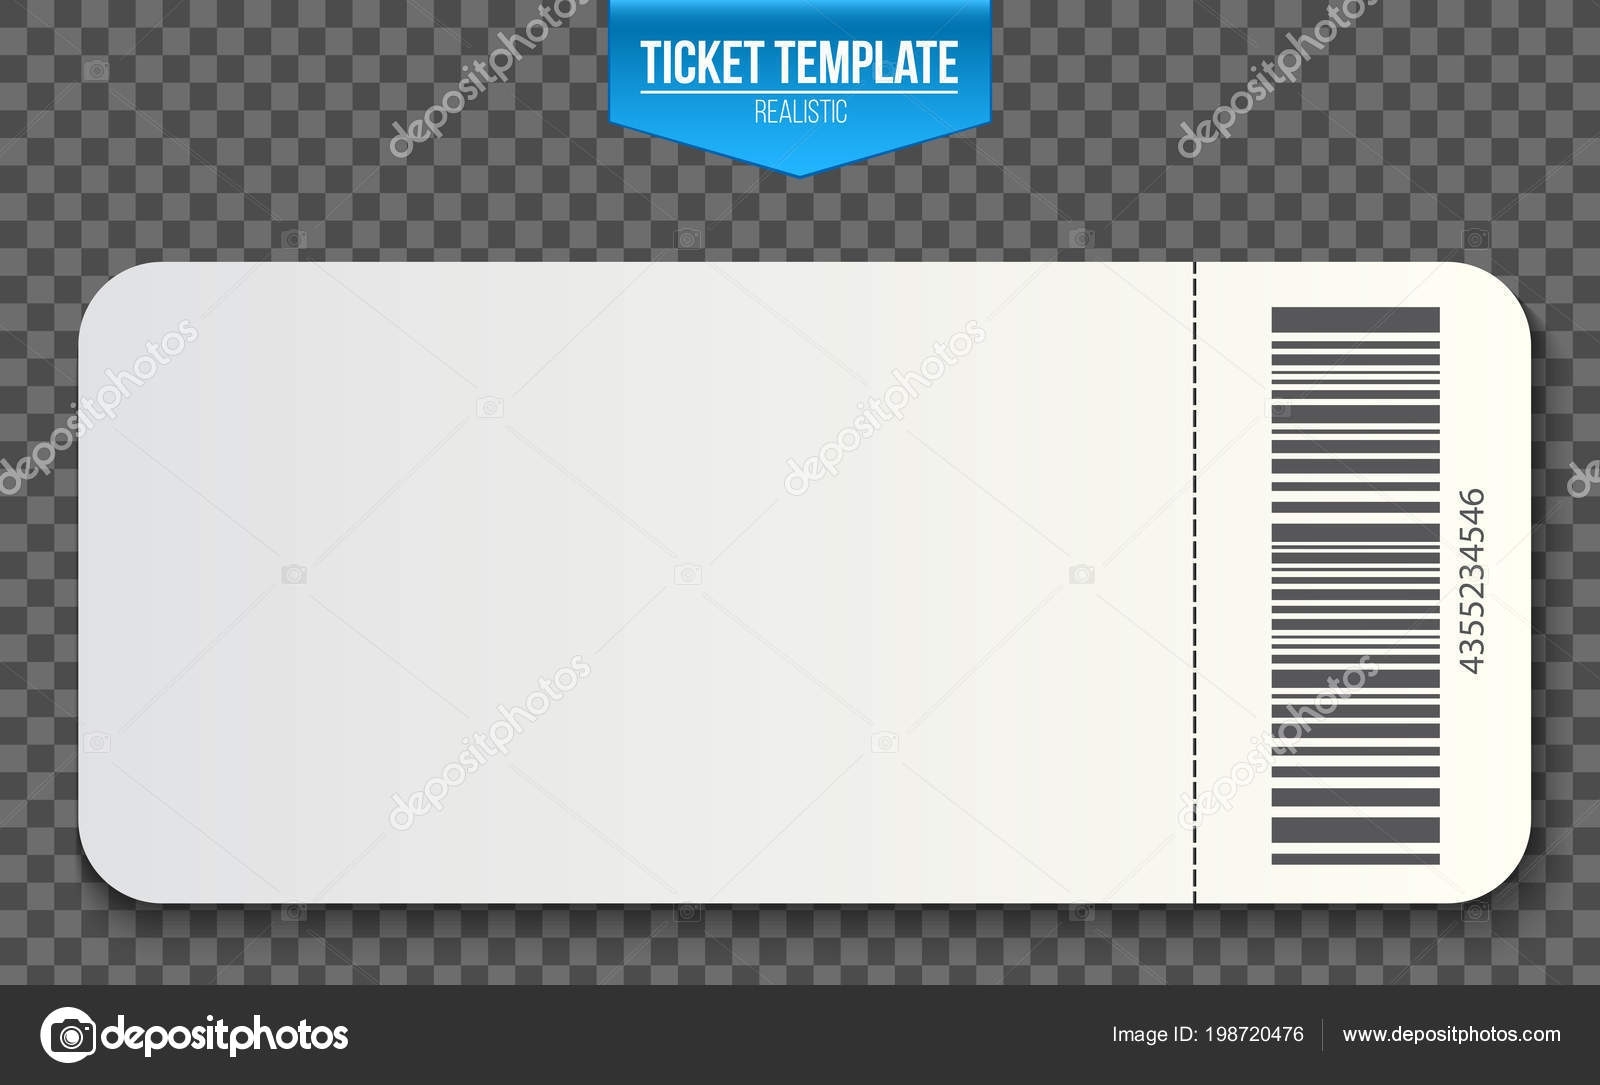 Blank Train Ticket Template Intended For Blank Train Ticket Template